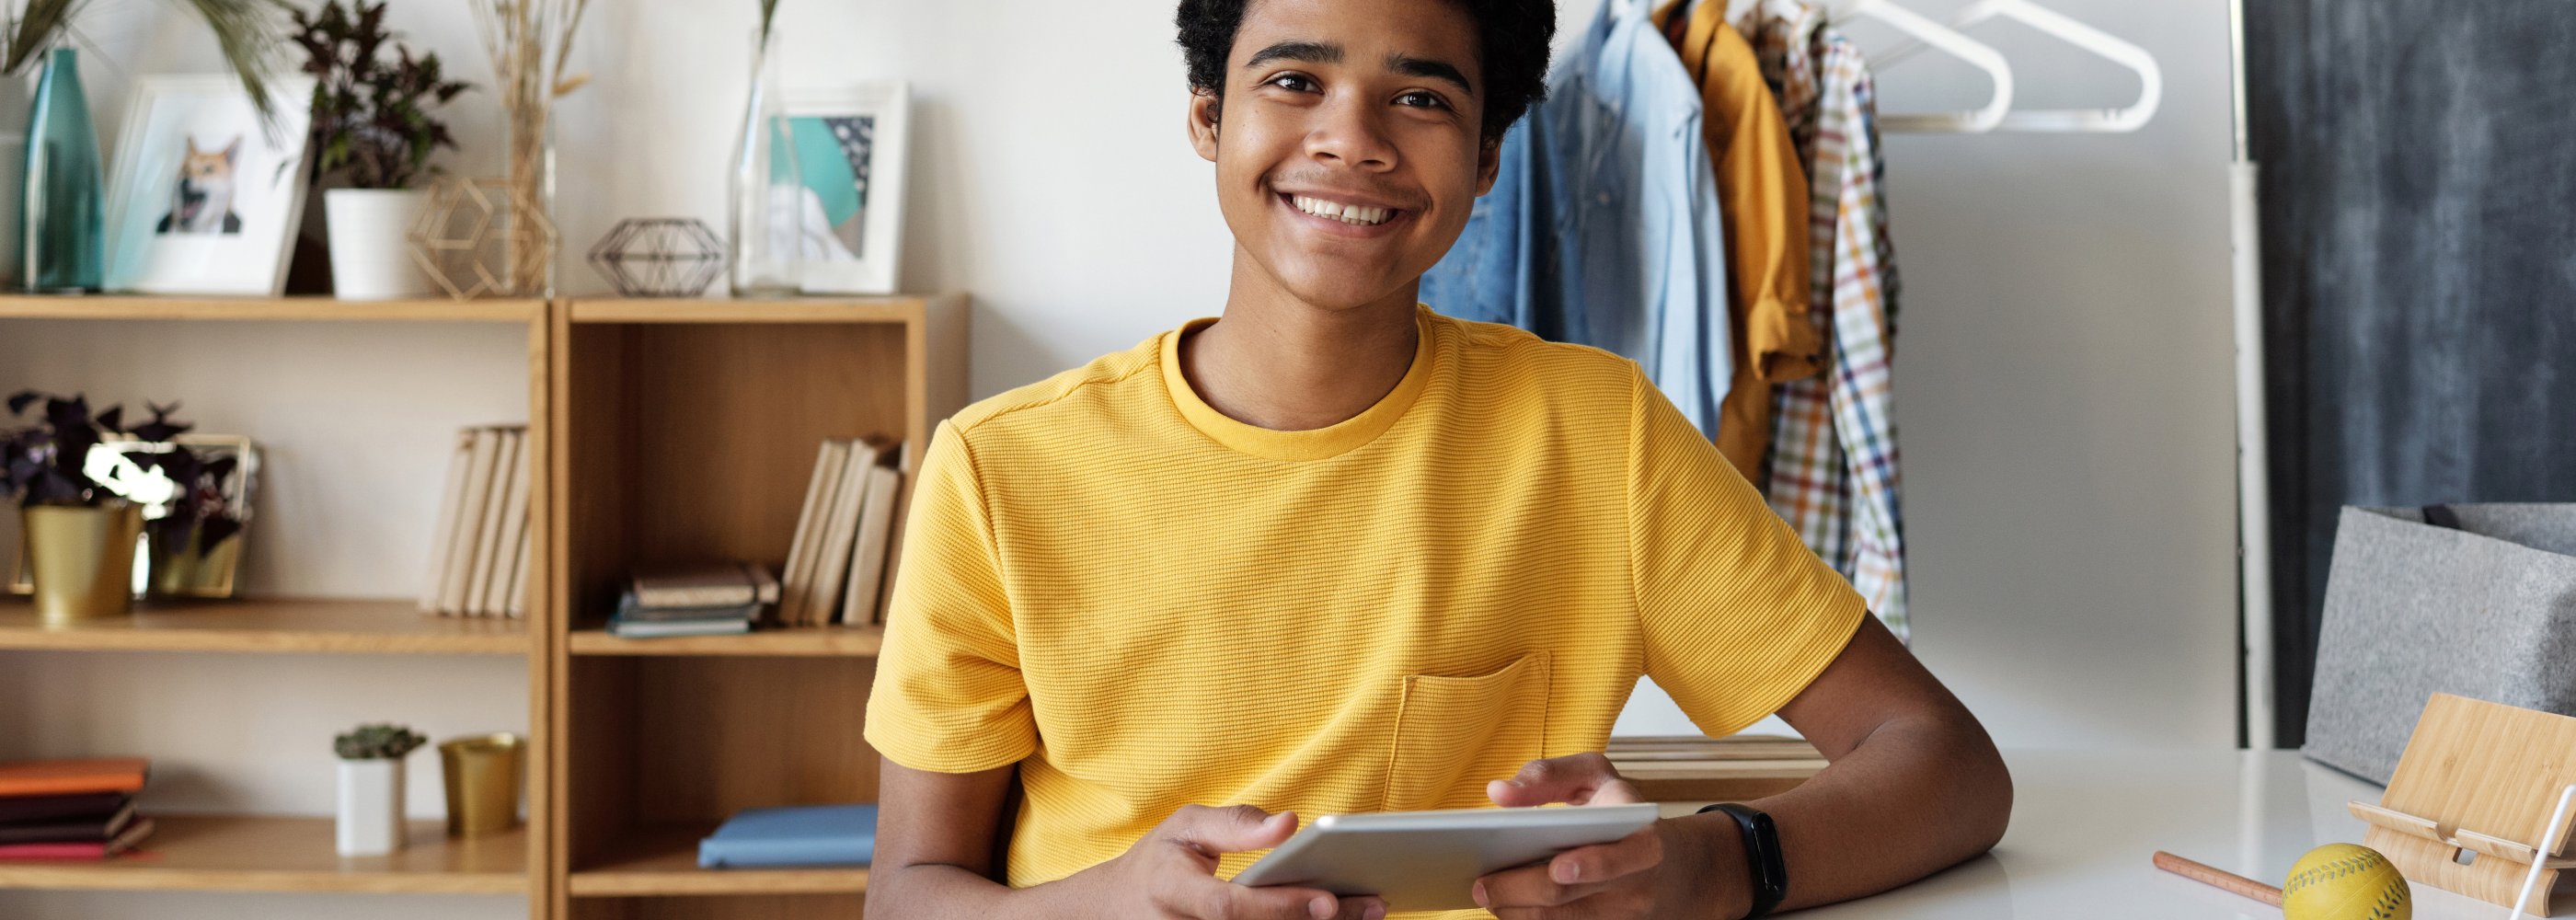 boy in yellow shirt smiling with technology